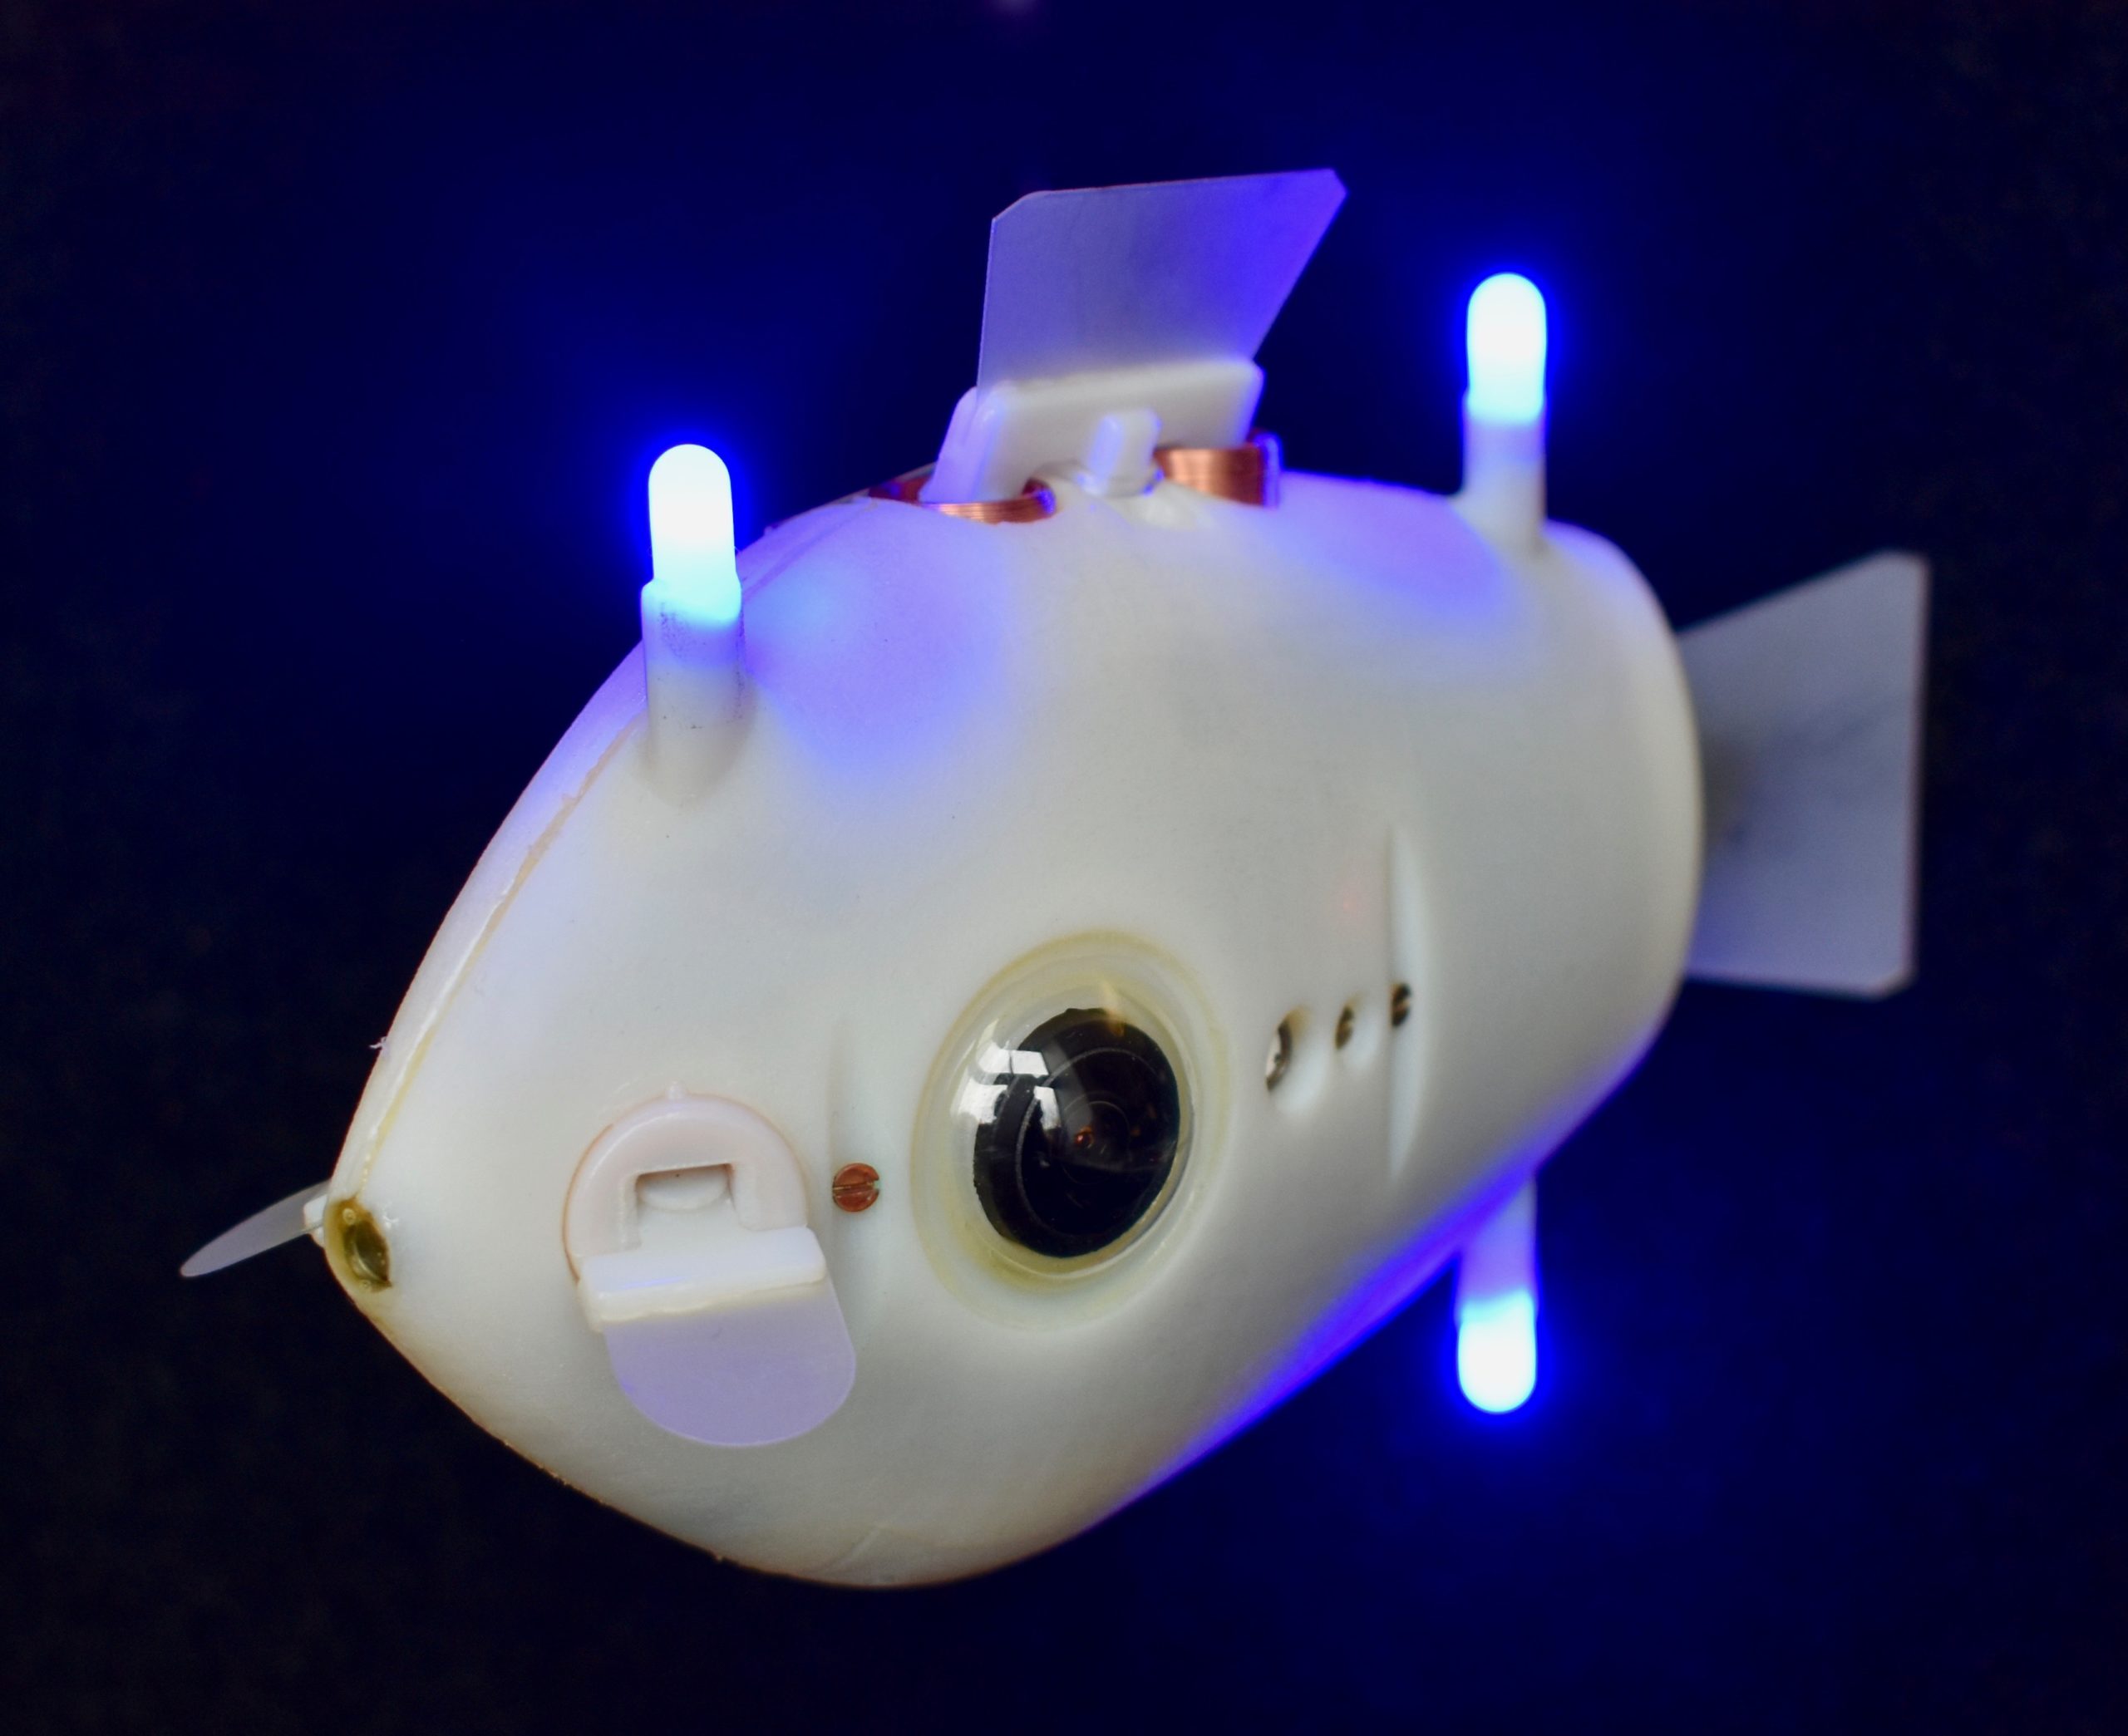 Robot fish (Image courtesy of Self-organizing Systems Research Group https://spectrum.ieee.org/automaton/robotics/industrial-robots/blueswarm-robotic-fish)